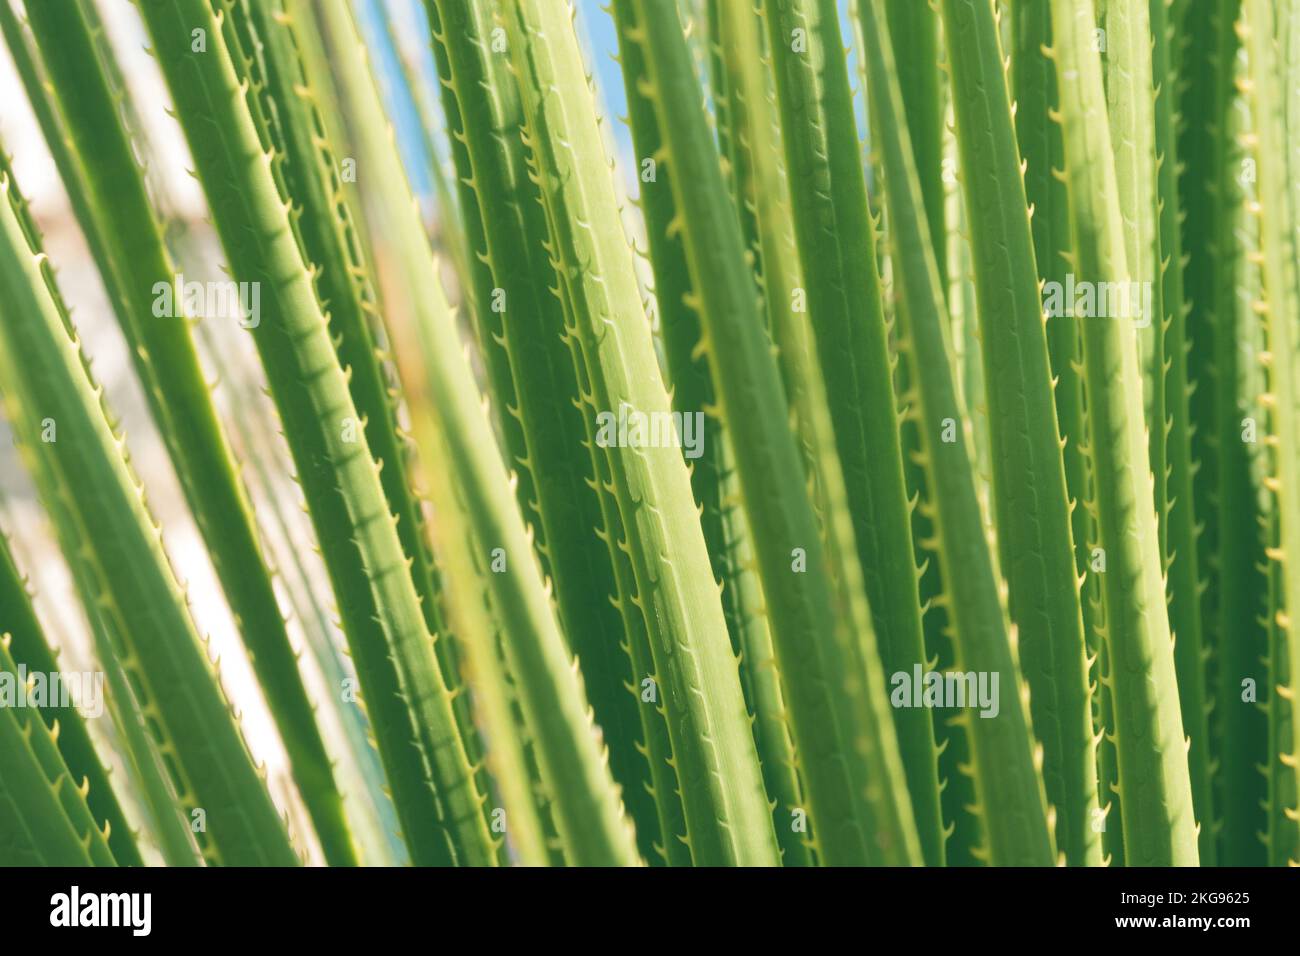 Long green succulent leaves of Dasylirion texanum close-up. Close up green leaves blurred defocused background. Stock Photo